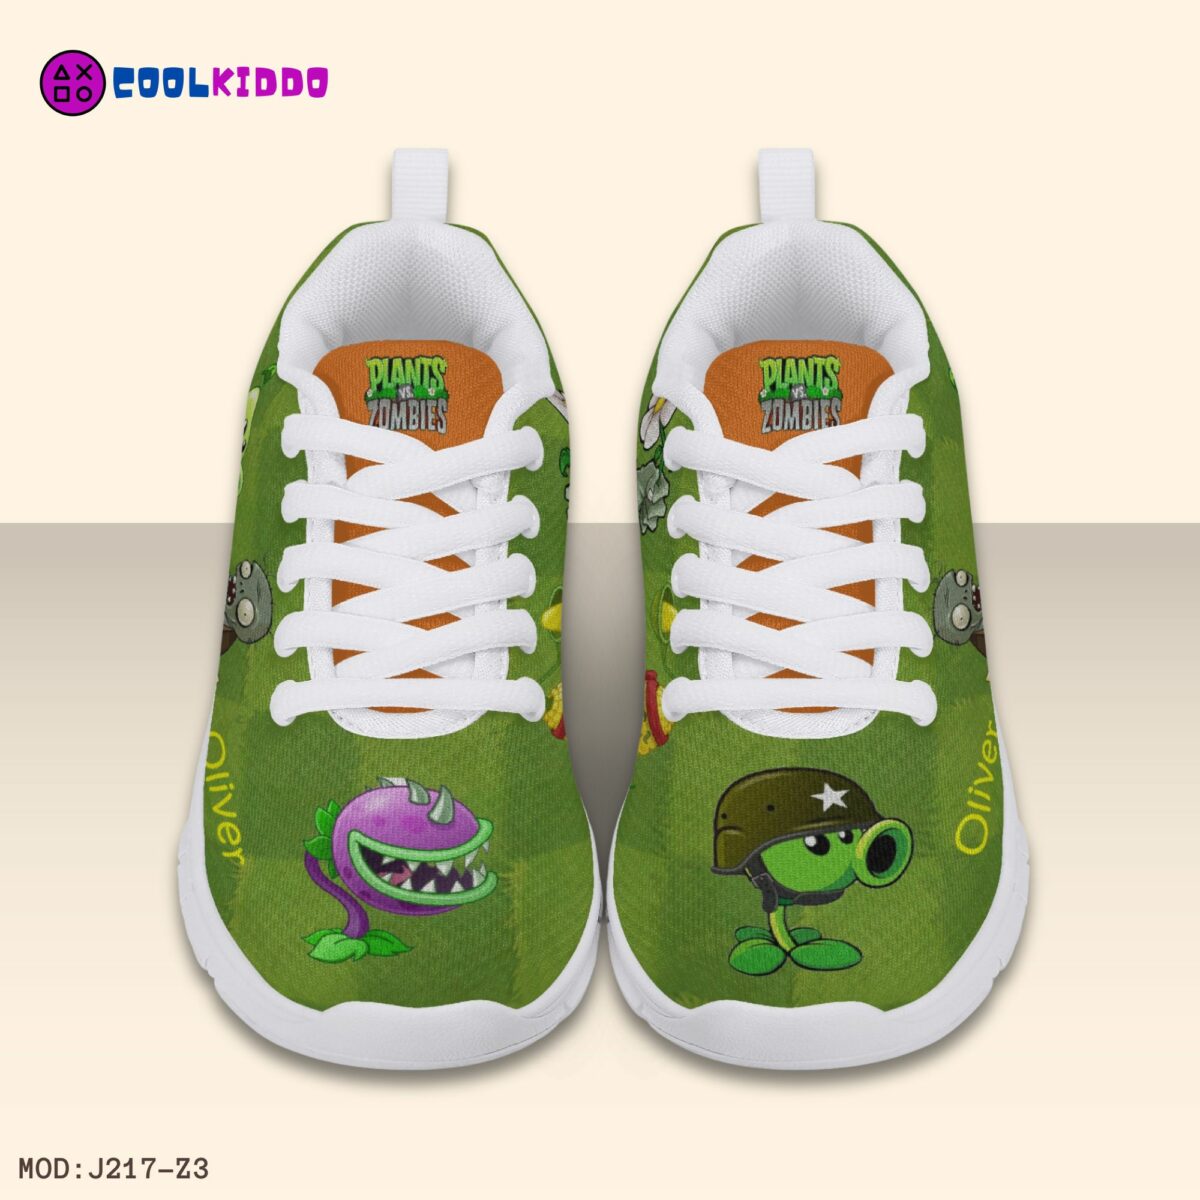 Personalized Plants vs Zombies Inspired Kids’ Lightweight Mesh Sneakers Cool Kiddo 20